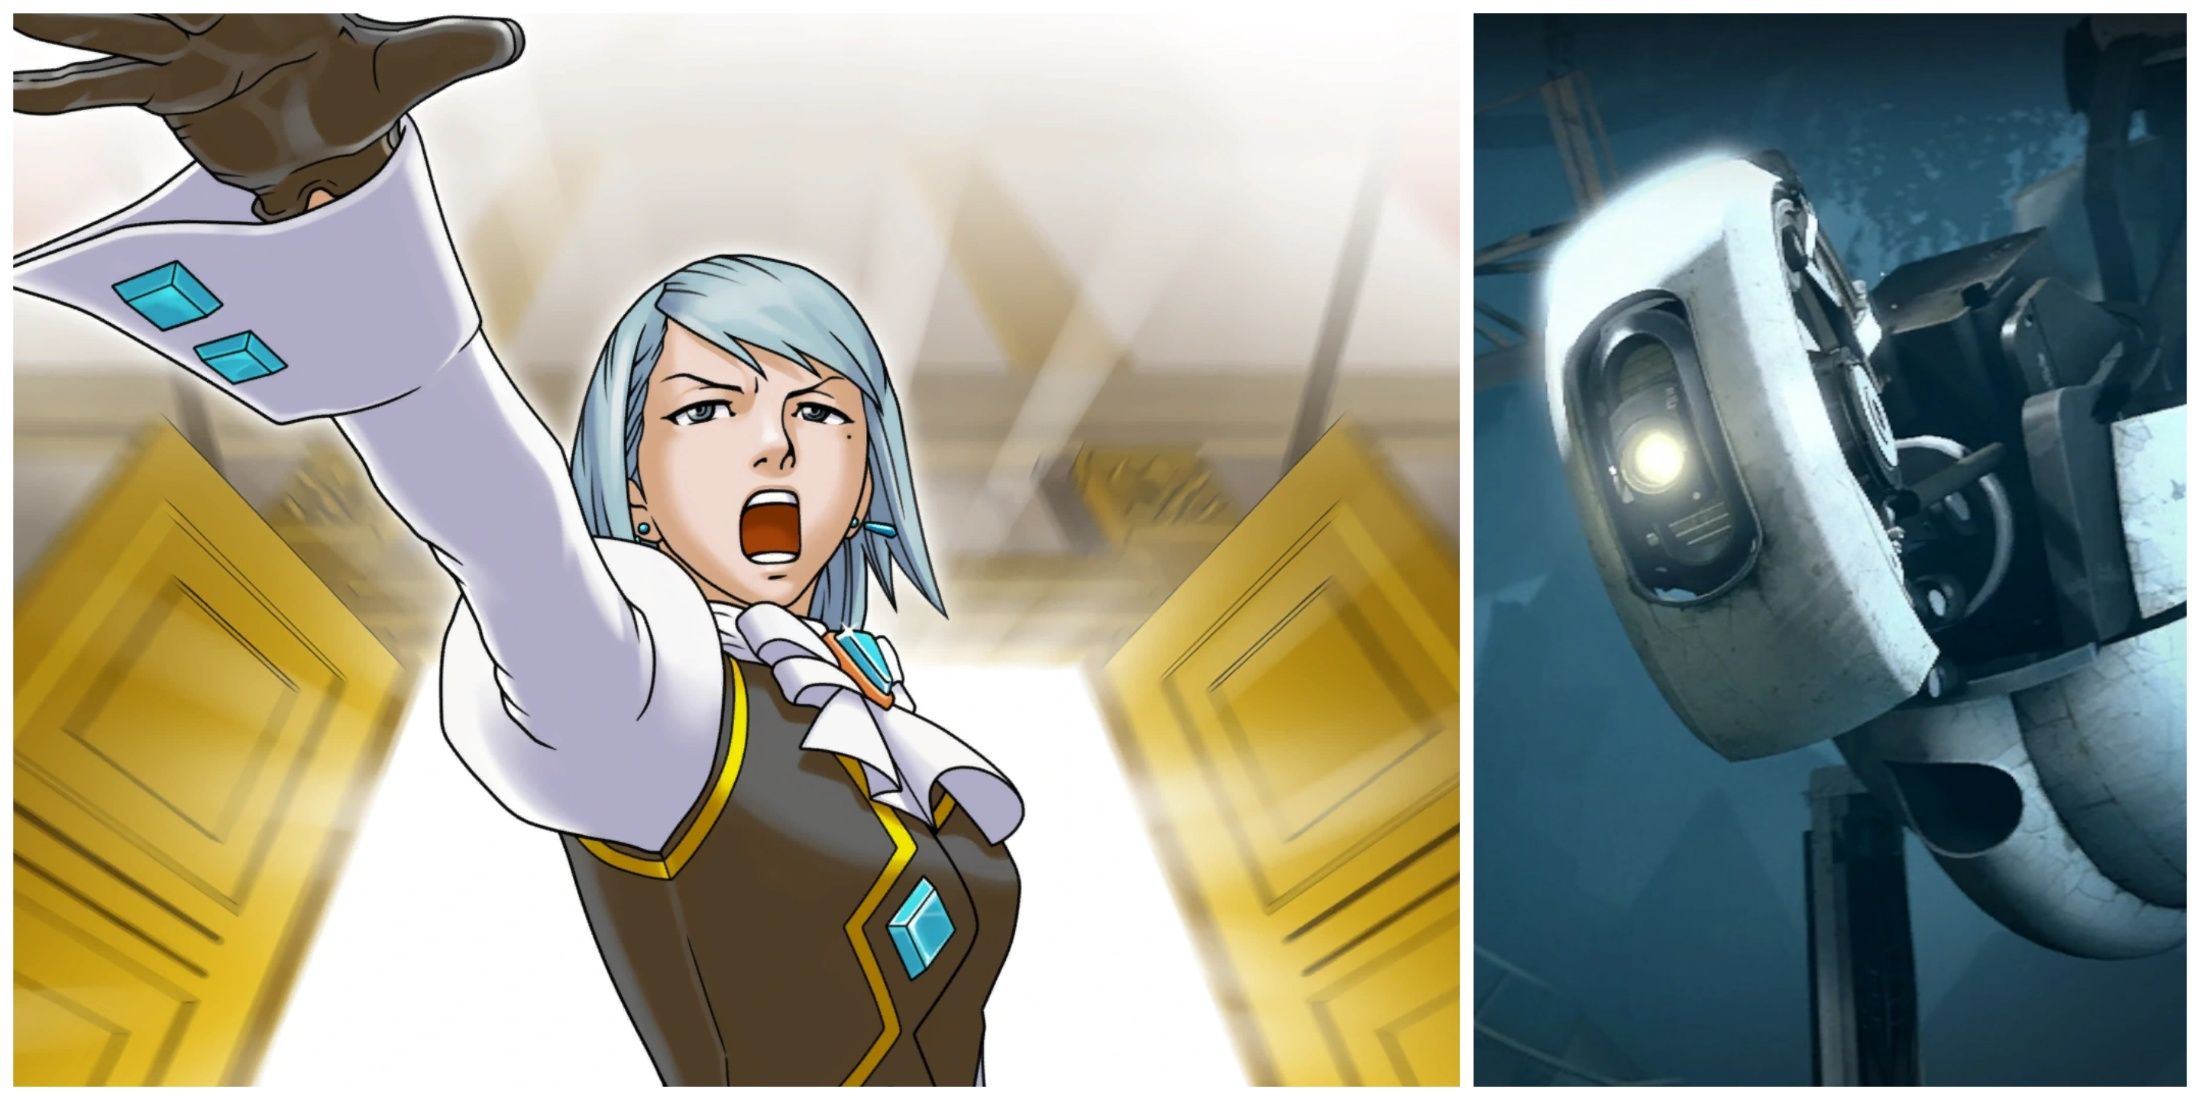 Franziska Von Karma from Ace Attorney (left) and GlaDOS from Portal 2 (right)